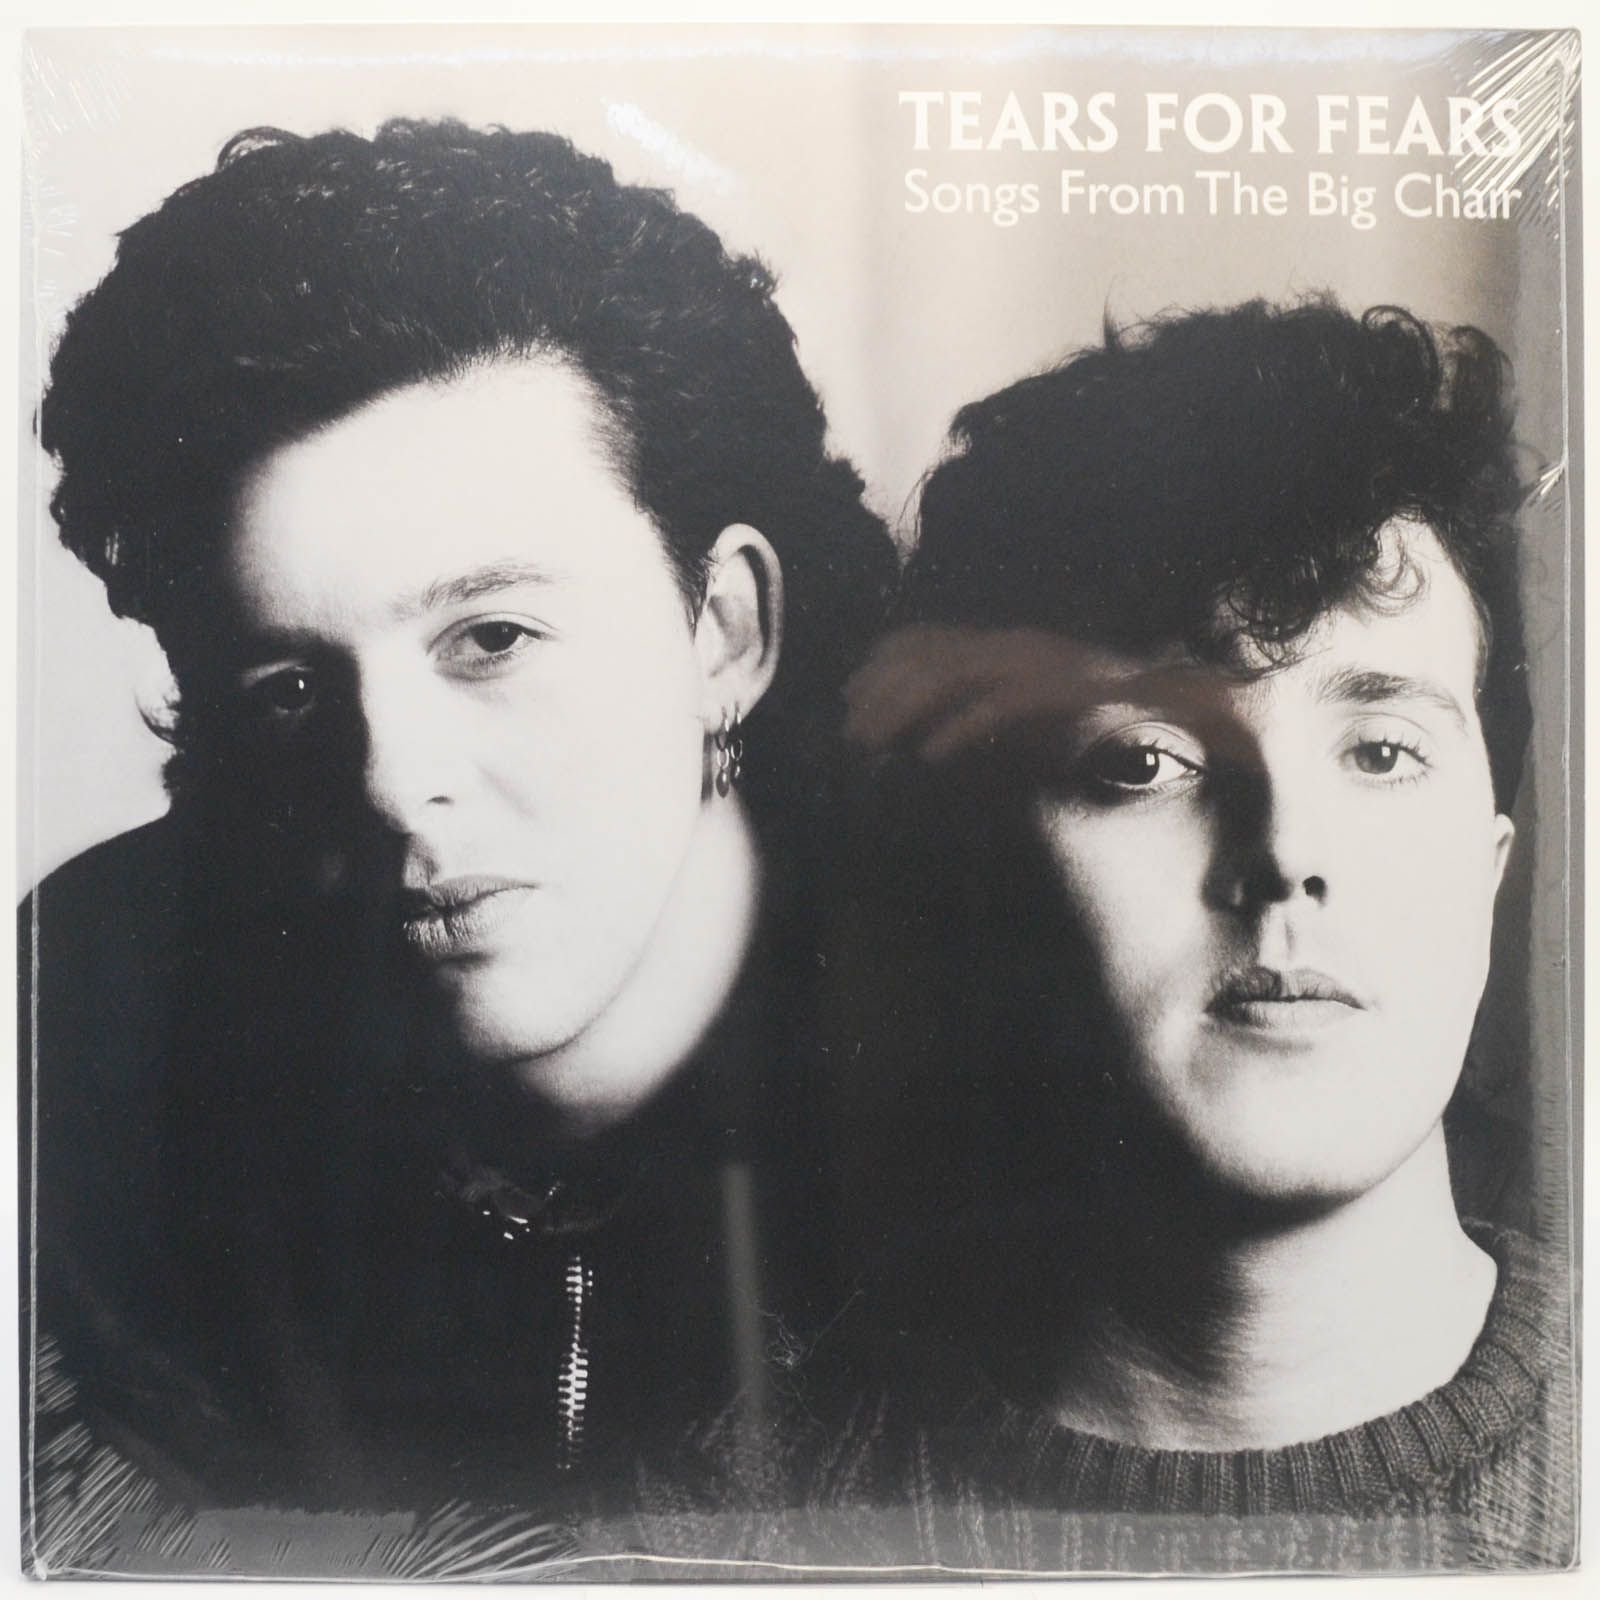 Tears For Fears — Songs From The Big Chair, 1985